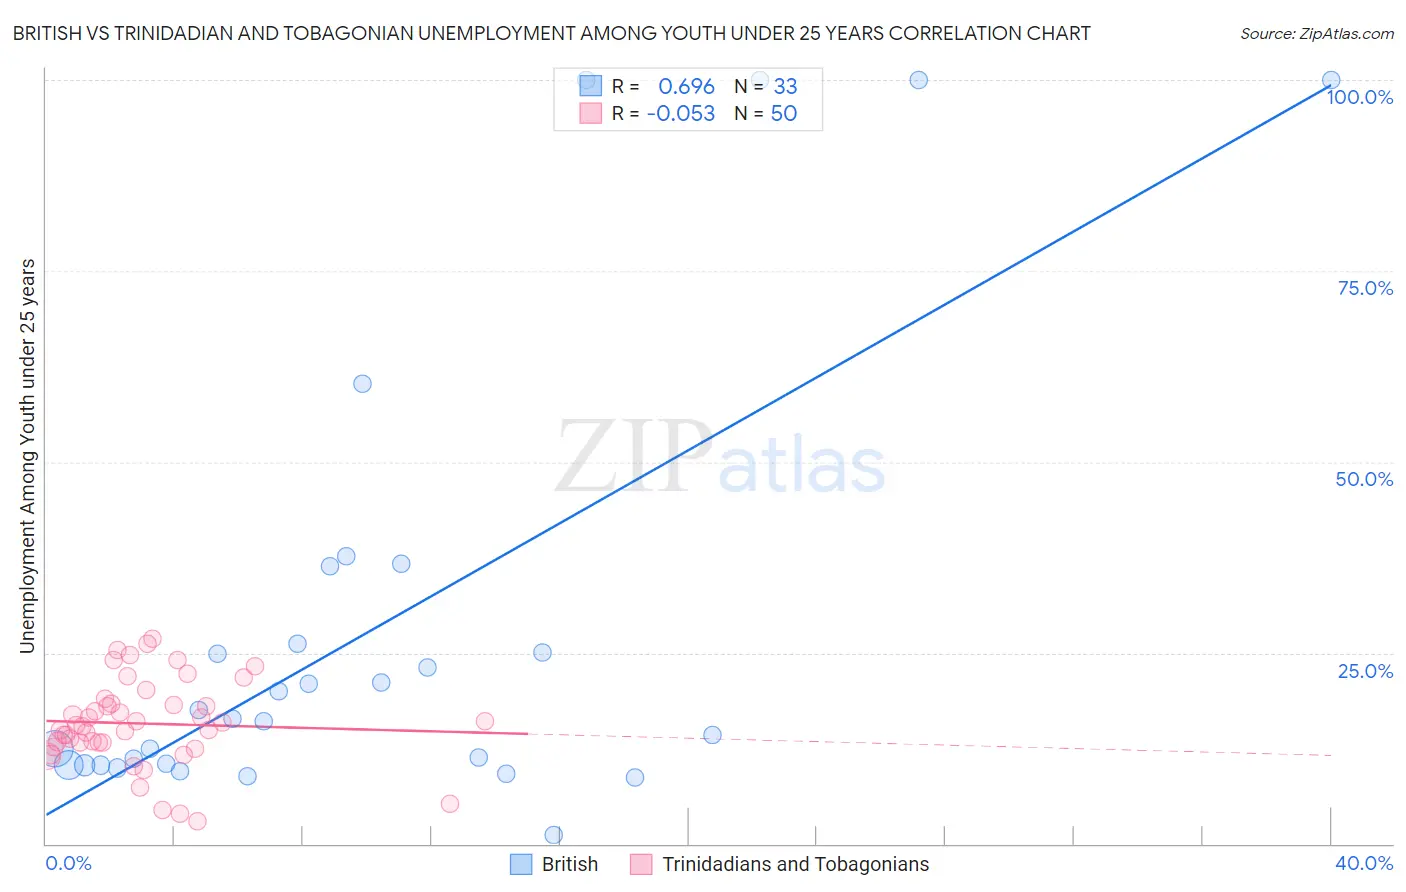 British vs Trinidadian and Tobagonian Unemployment Among Youth under 25 years